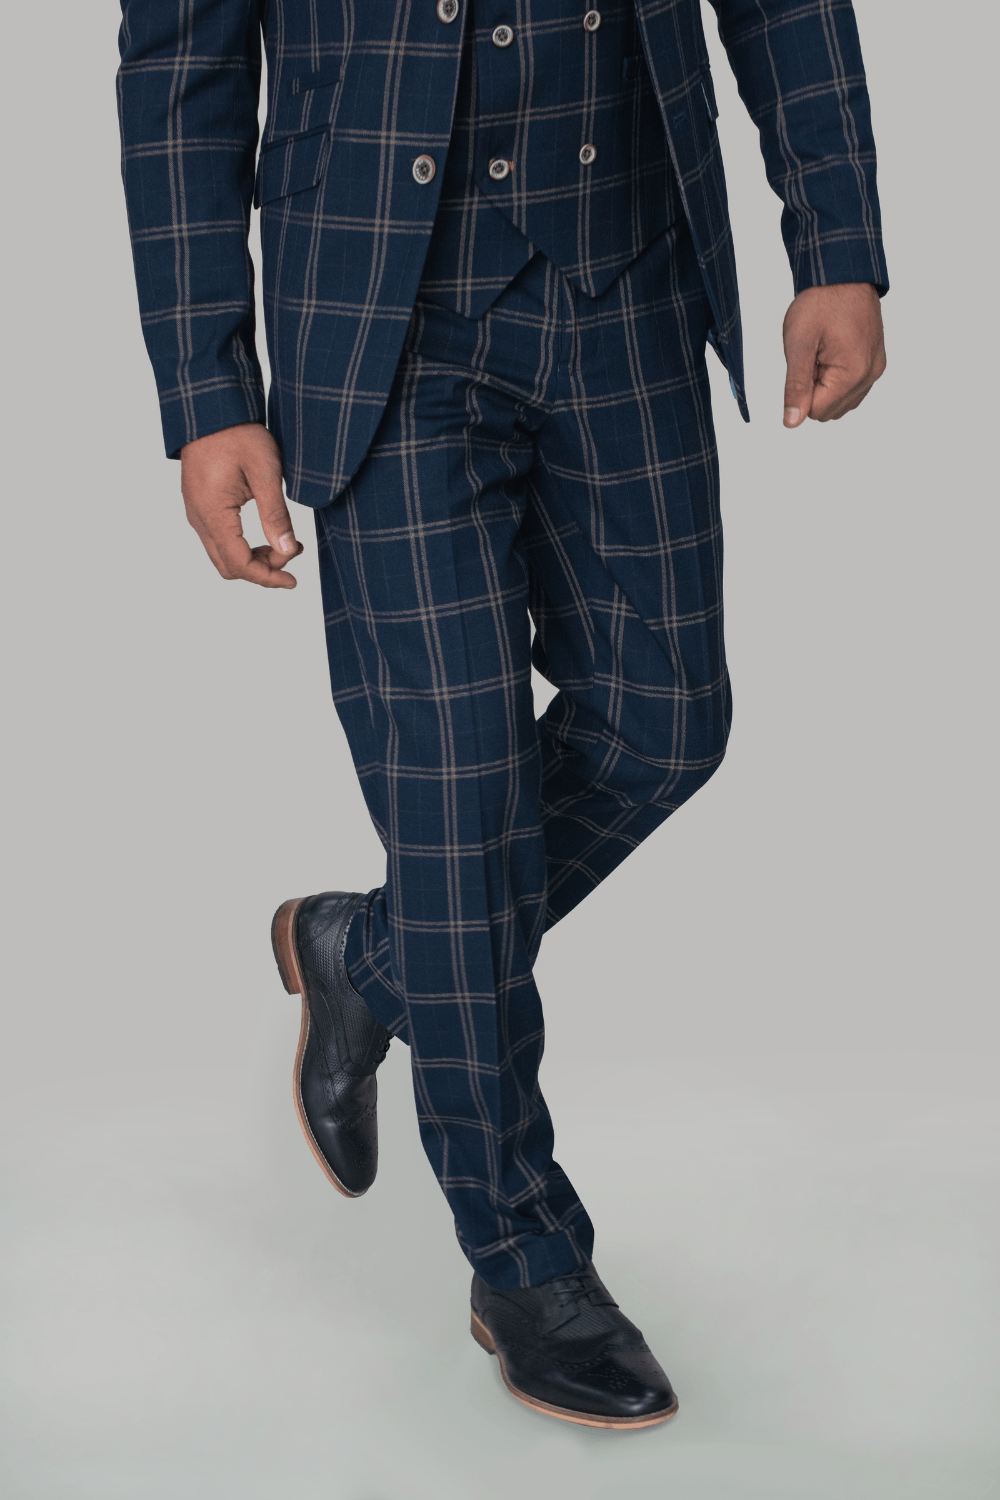 Hardy Navy Checked Trousers - Trousers - 30R - THREADPEPPER